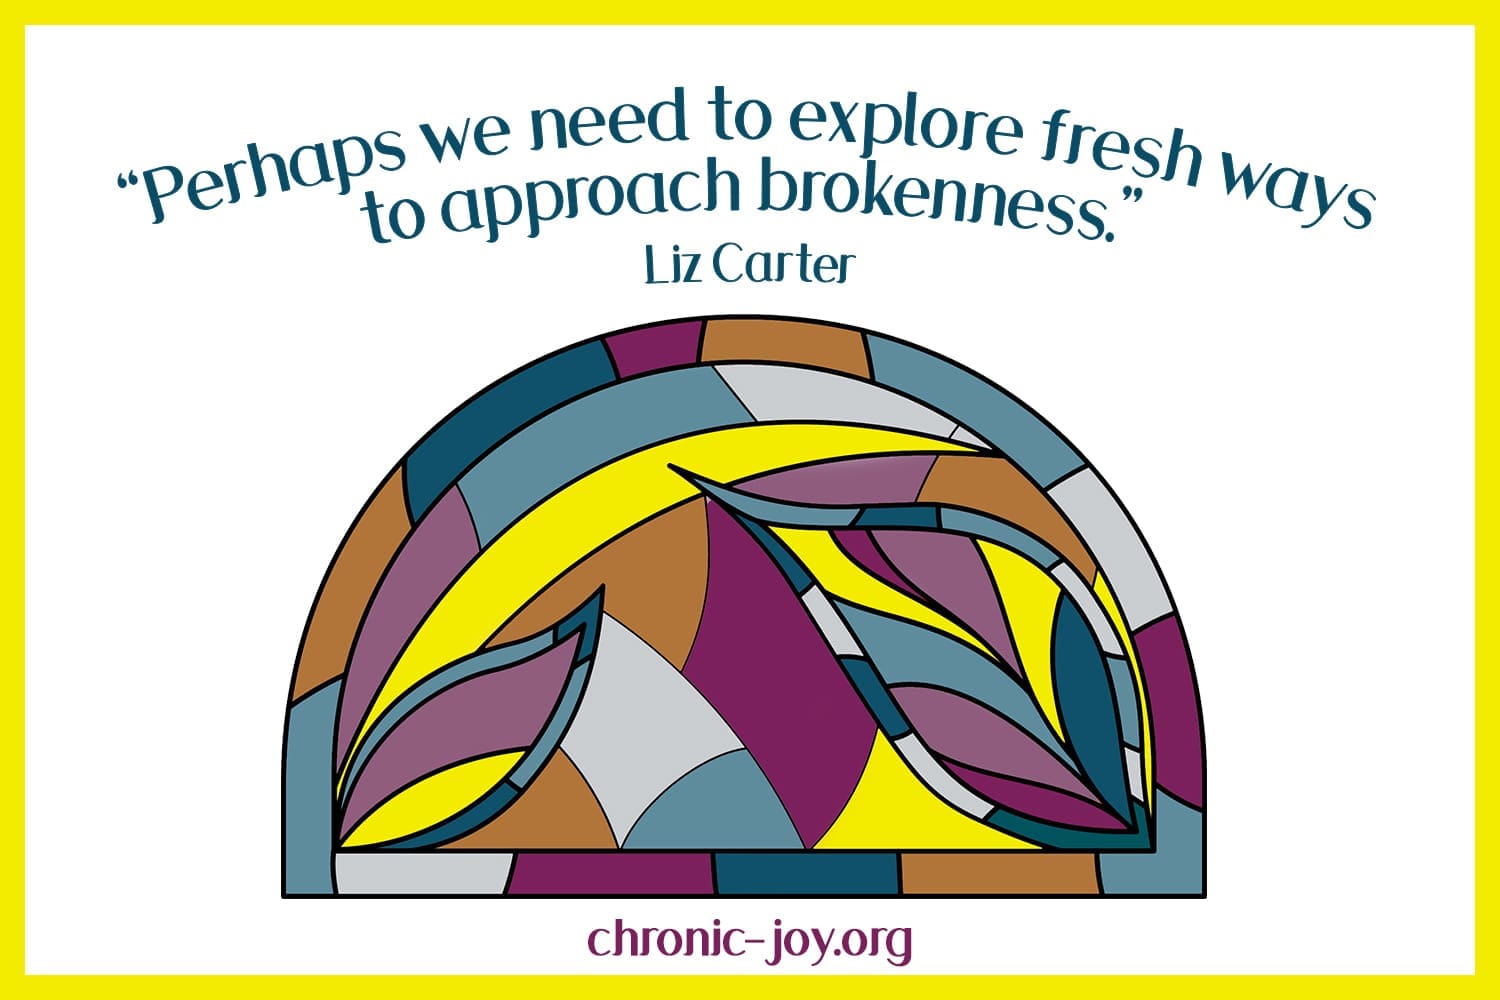 Fresh ways to approach brokenness.